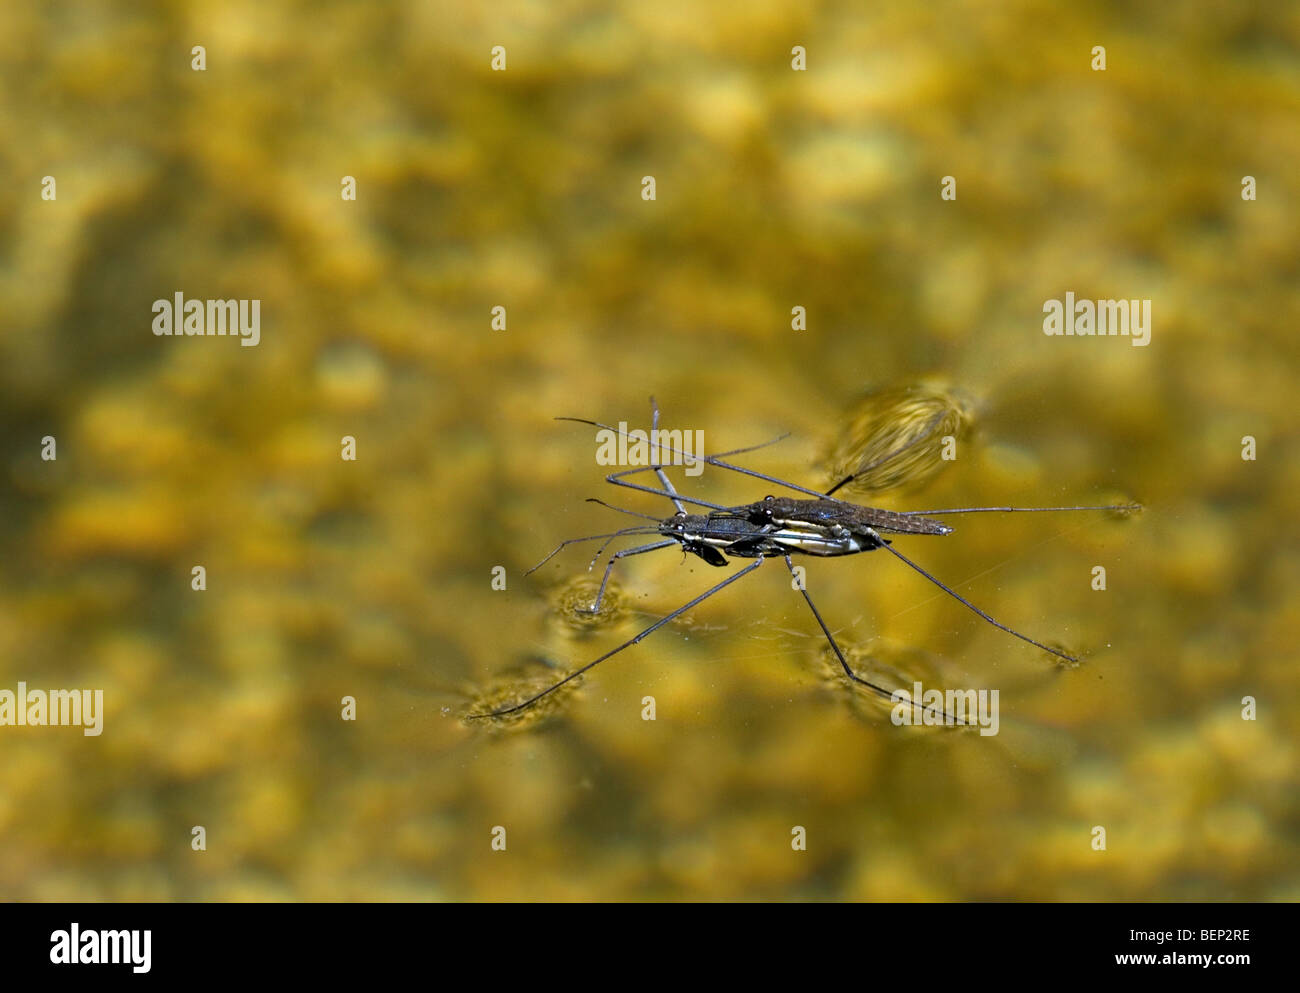 Couple of water striders / water skimmers (Gerridae) mating on water surface of pond Stock Photo